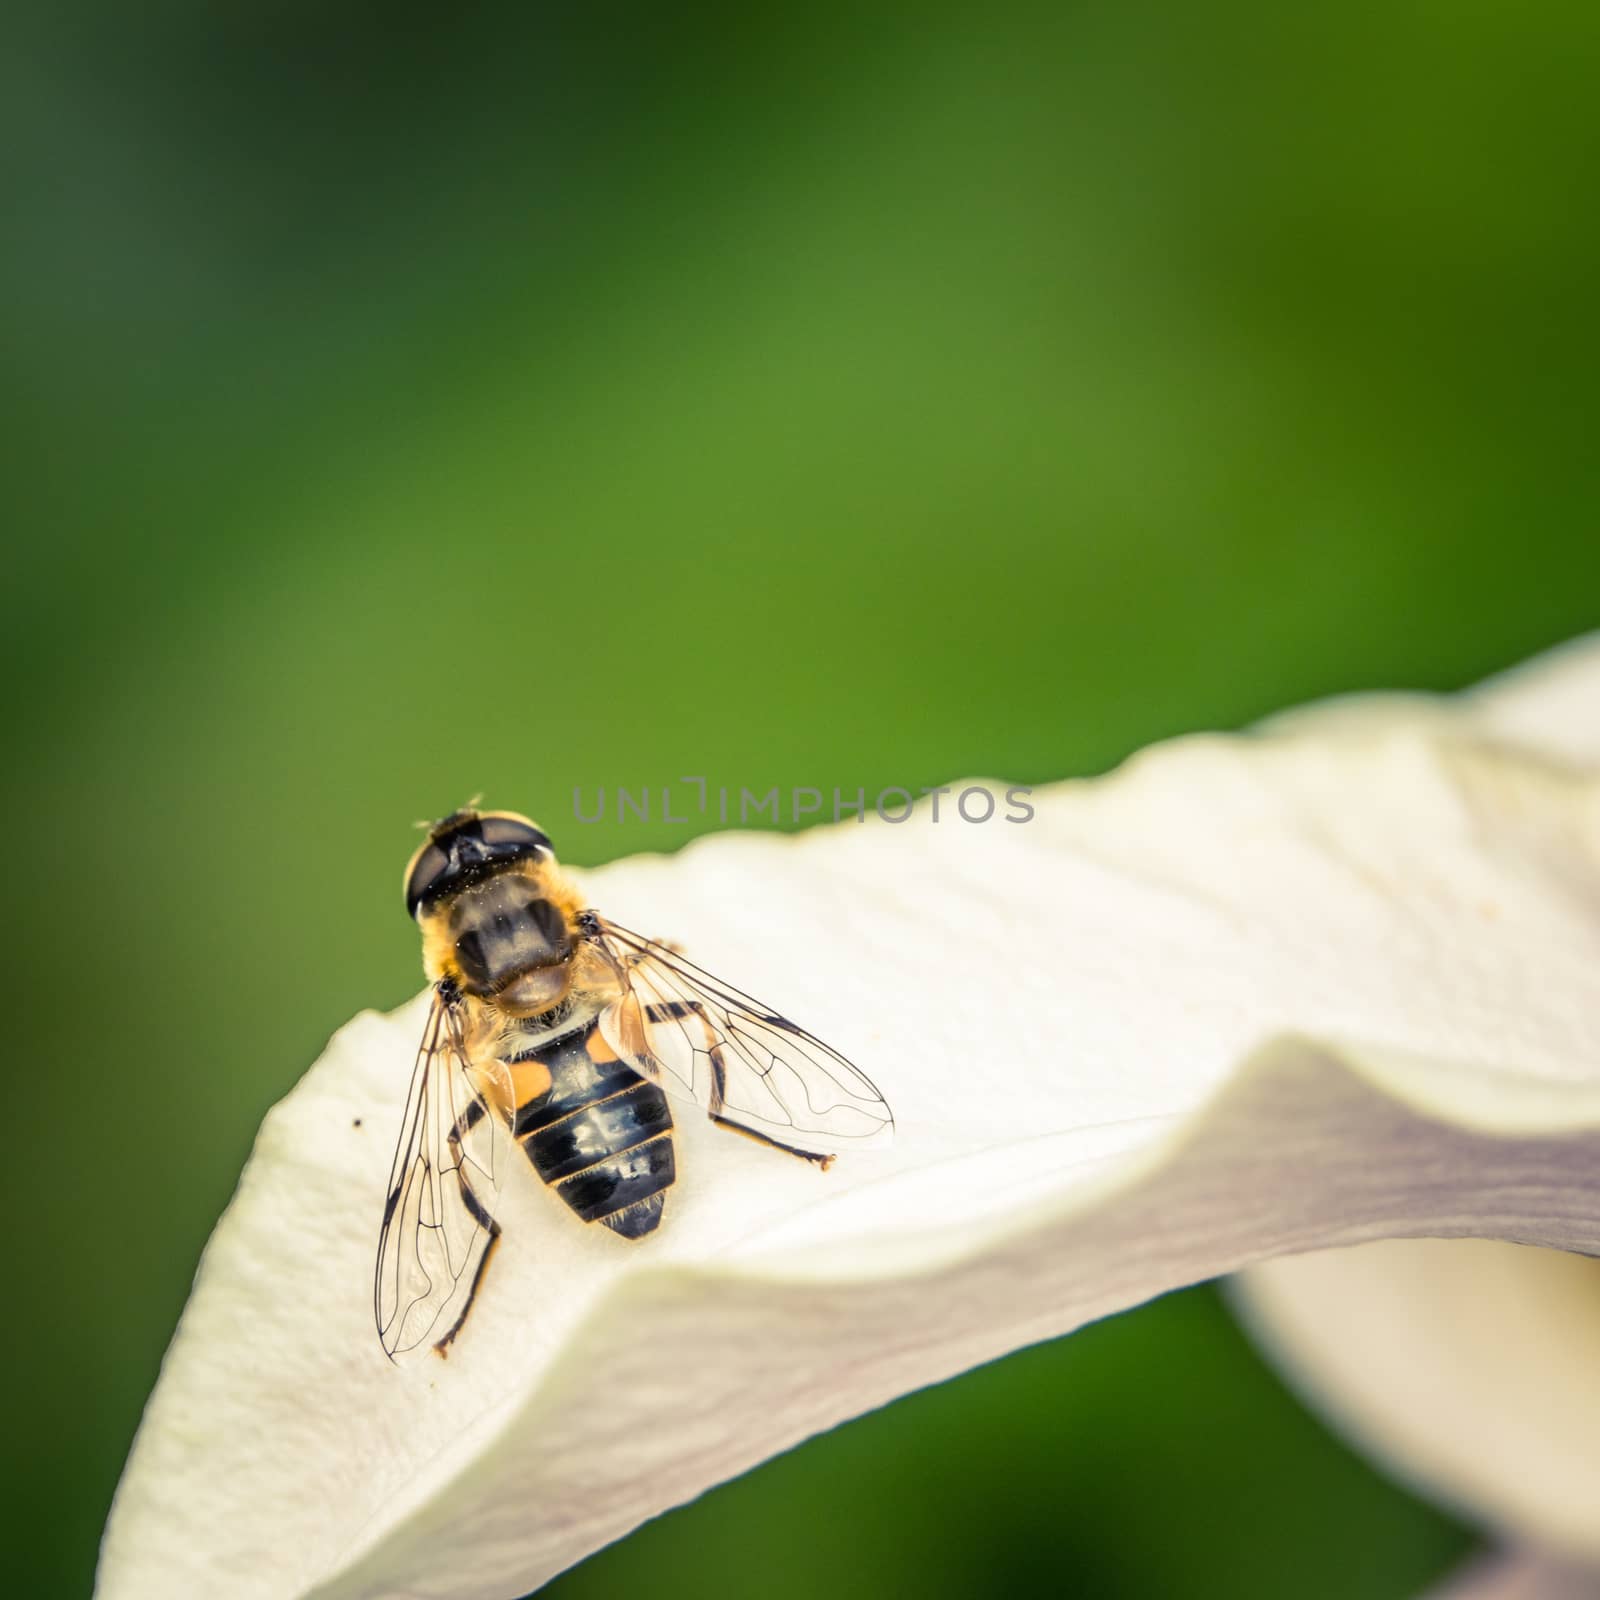 Wasp On A Flower by mrdoomits